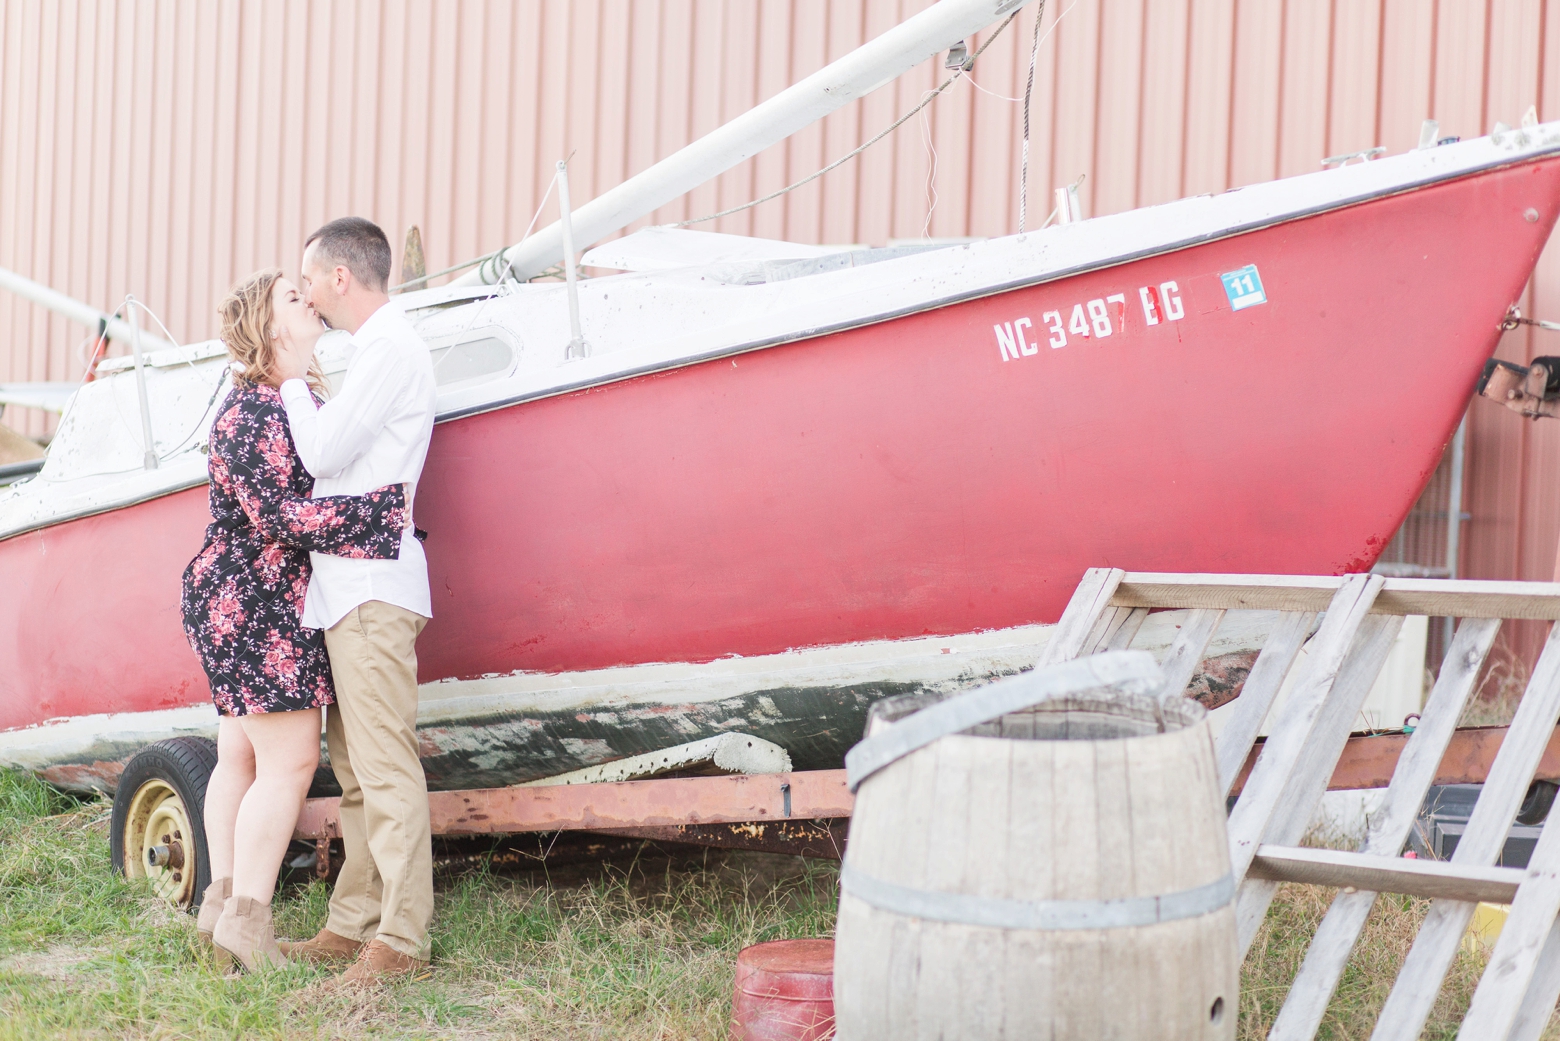 What to Wear for your Engagement Photos by Angie McPherson Photography